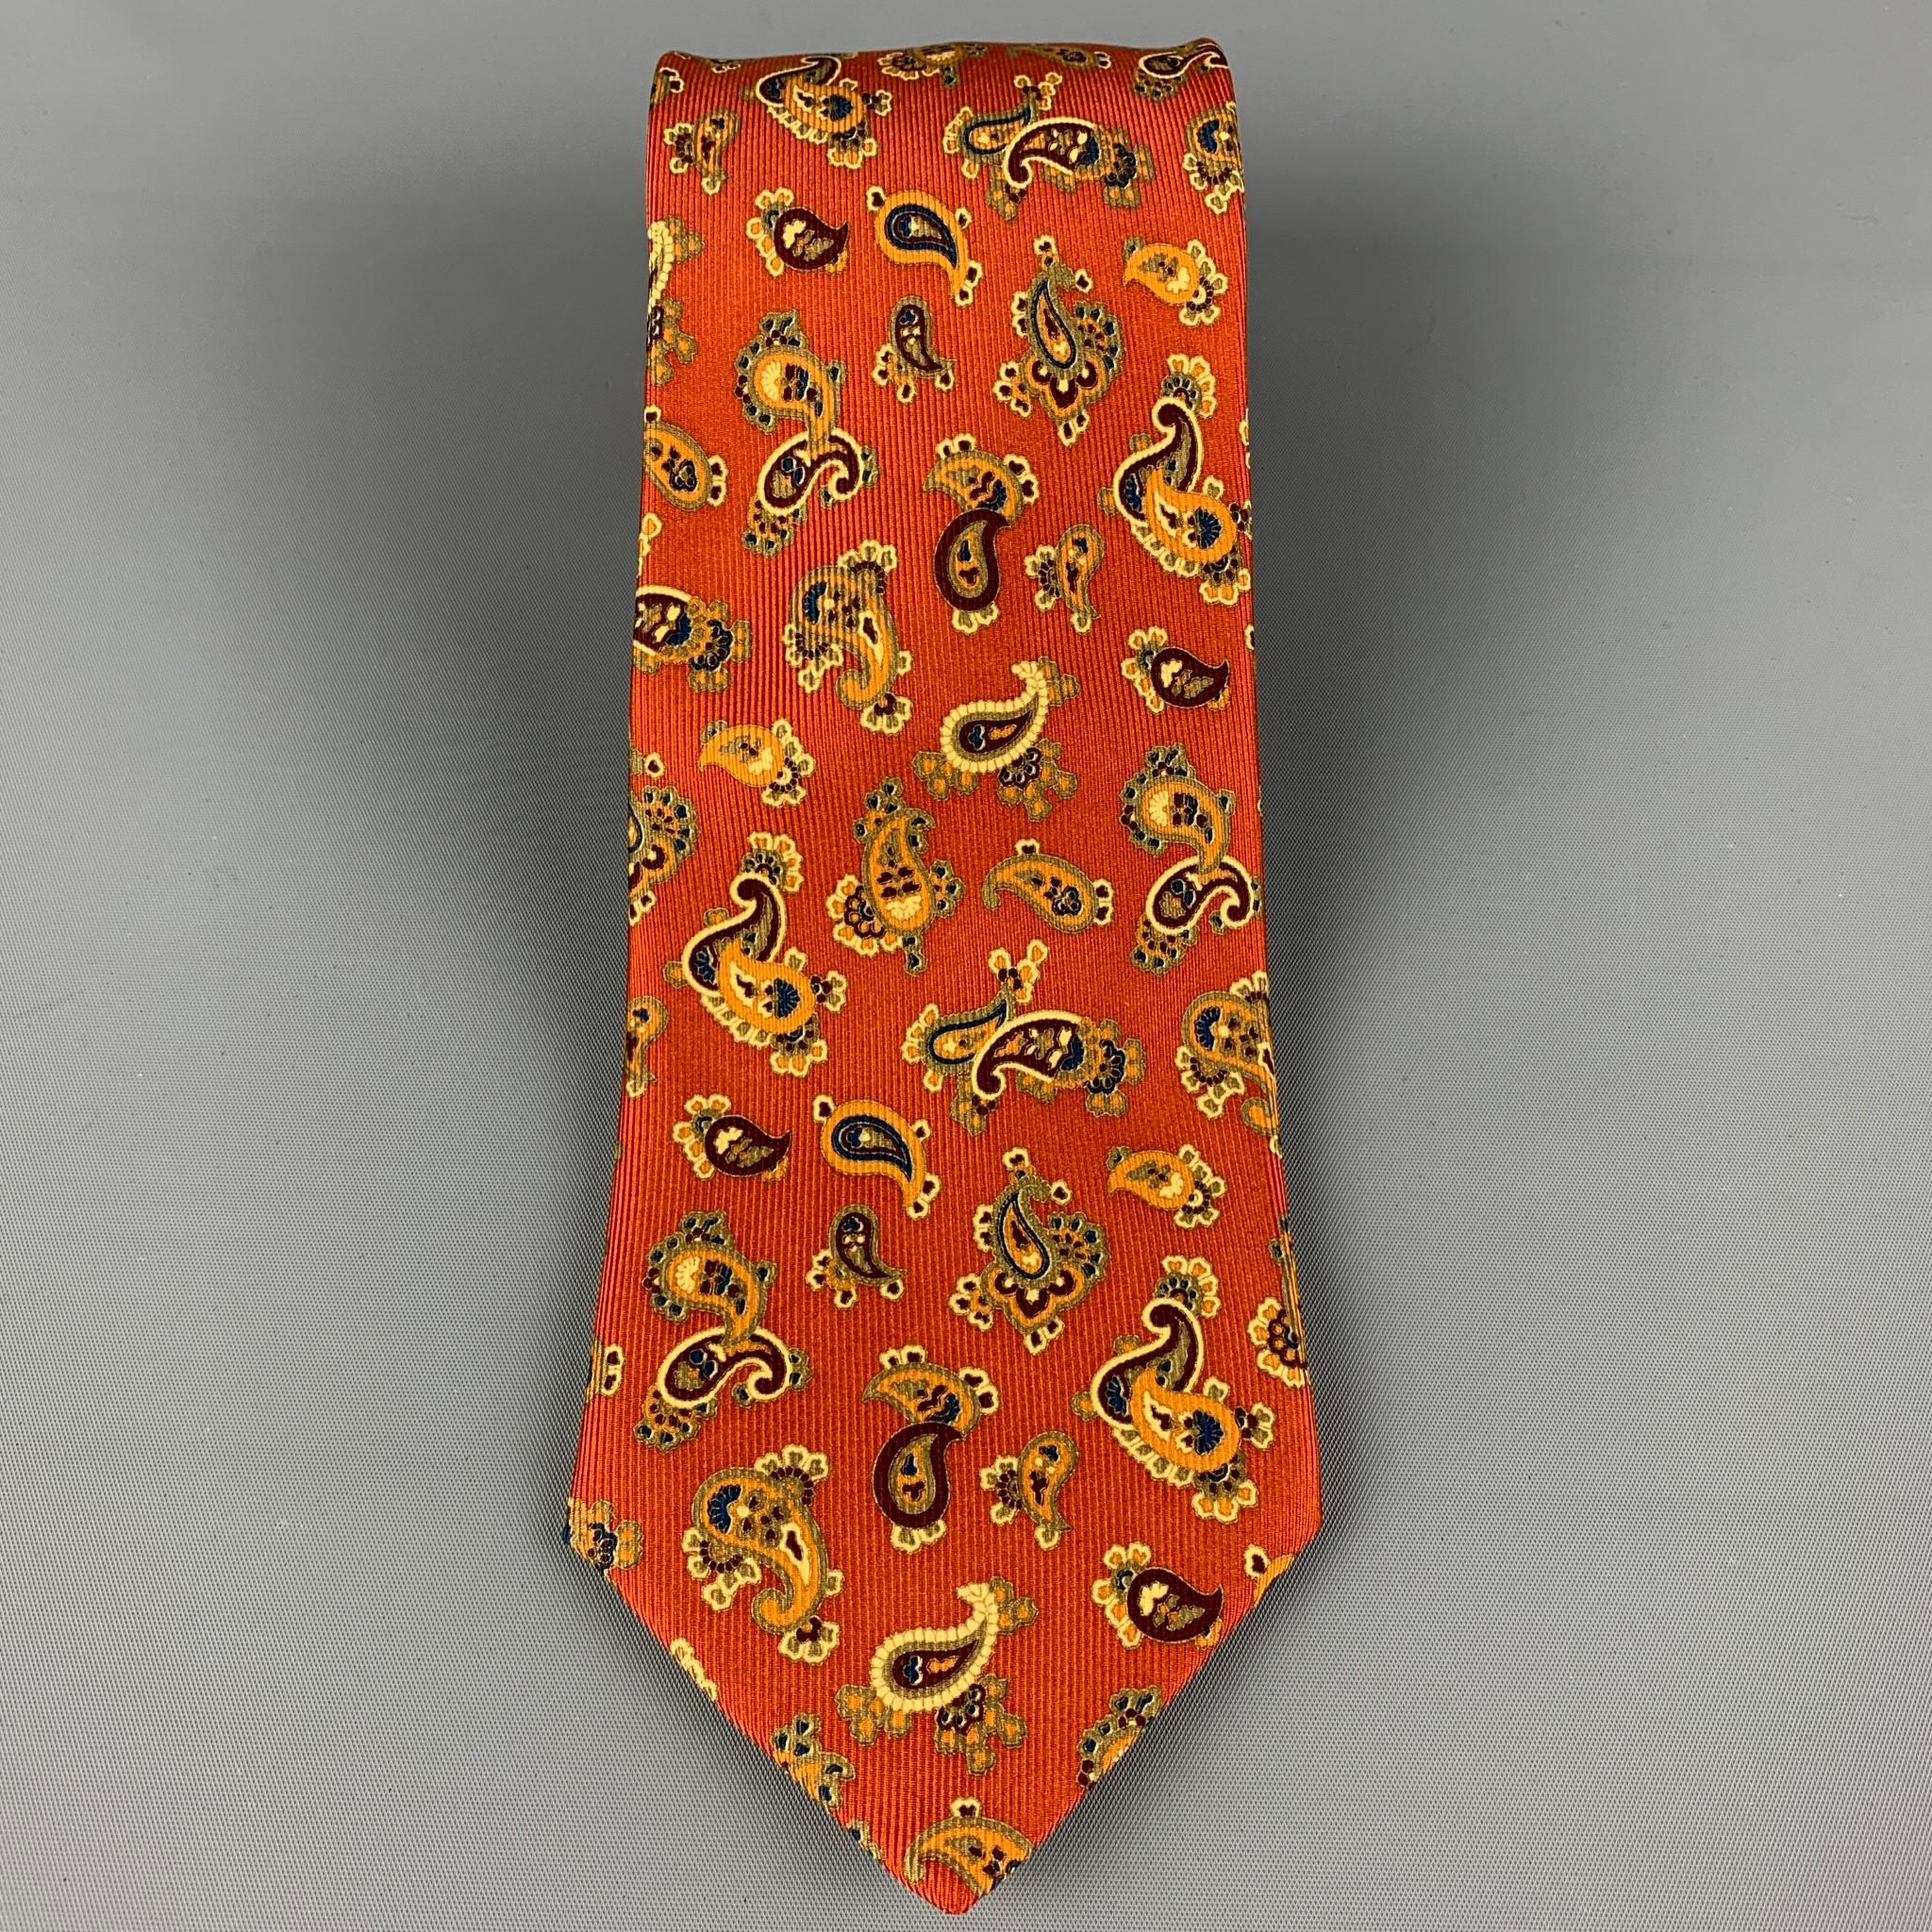 BRIONI necktie comes in a brick & tan silk with a all over paisley print. Made in Italy.

Very Good Pre-Owned Condition.
Original Retail Price: $330.00

Width: 3.75 in.
Length: 62 in. 